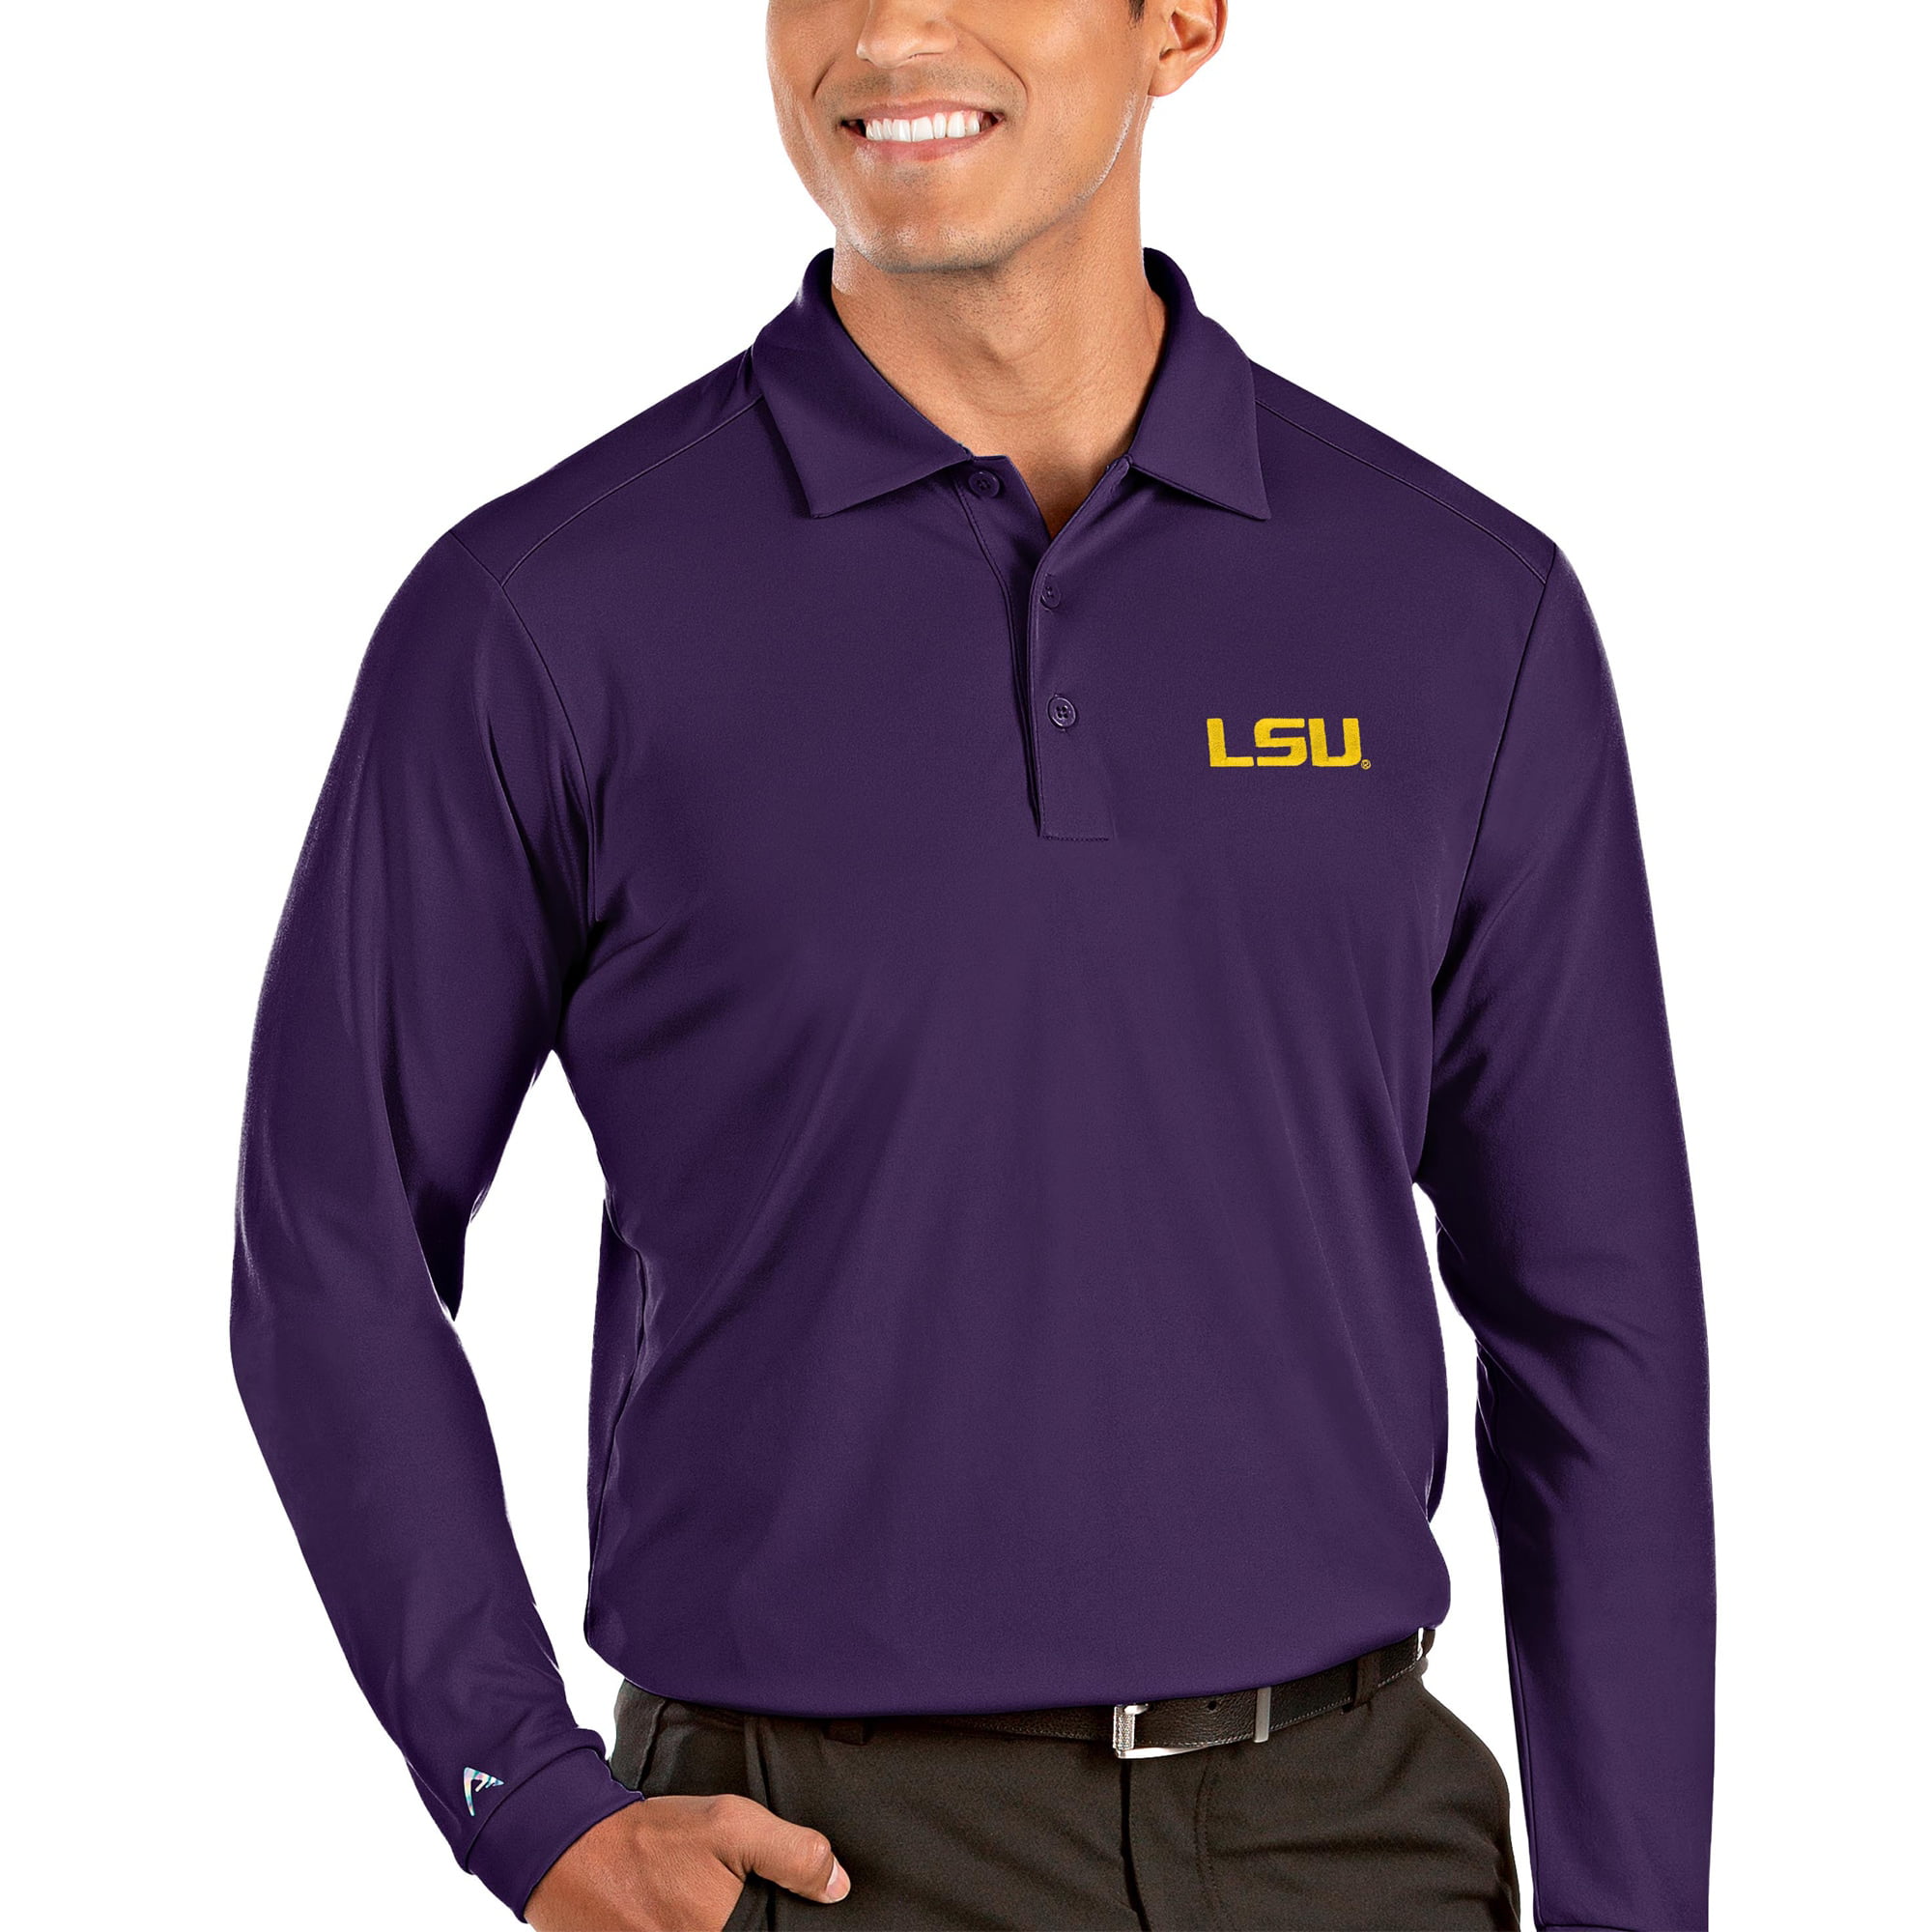 LSU Louisiana State Tigers Short-Sleeve Polo Shirt Cotton/Poly Luxury Blend